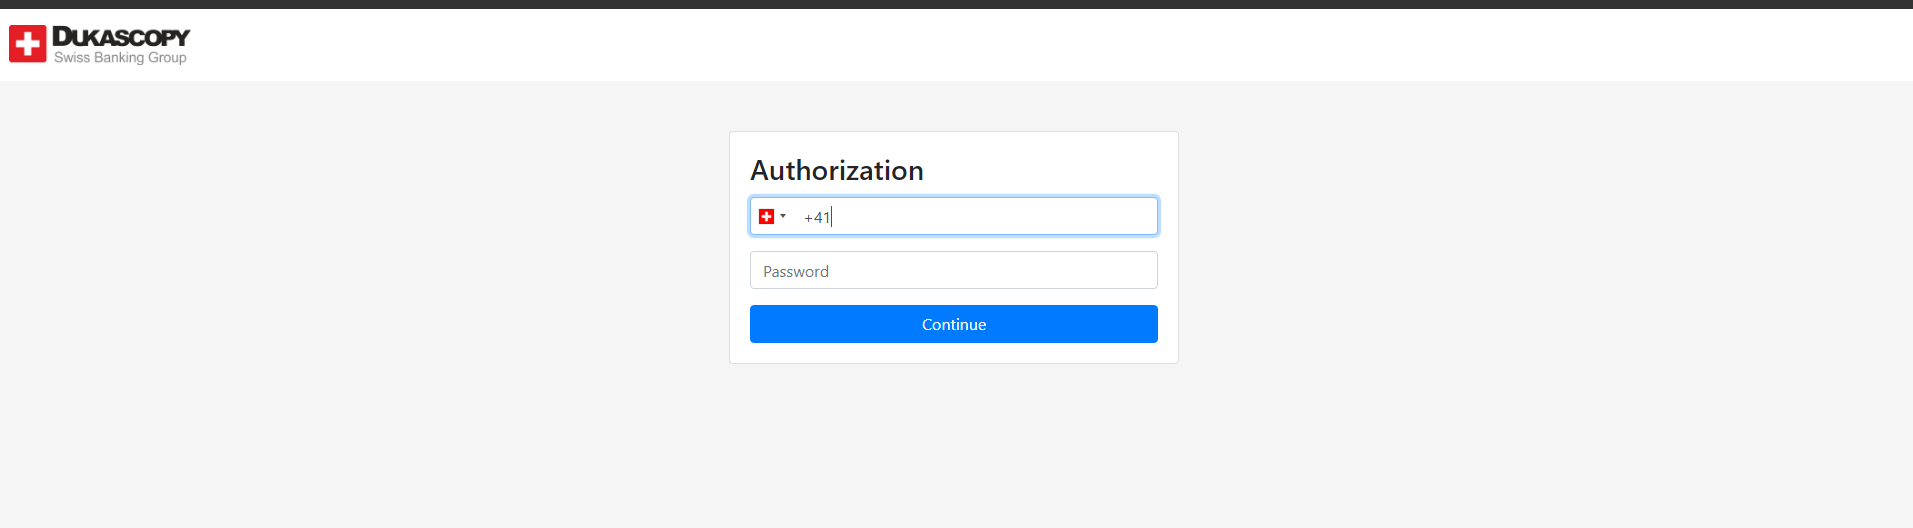 Sign in with your Dukascopy credentials